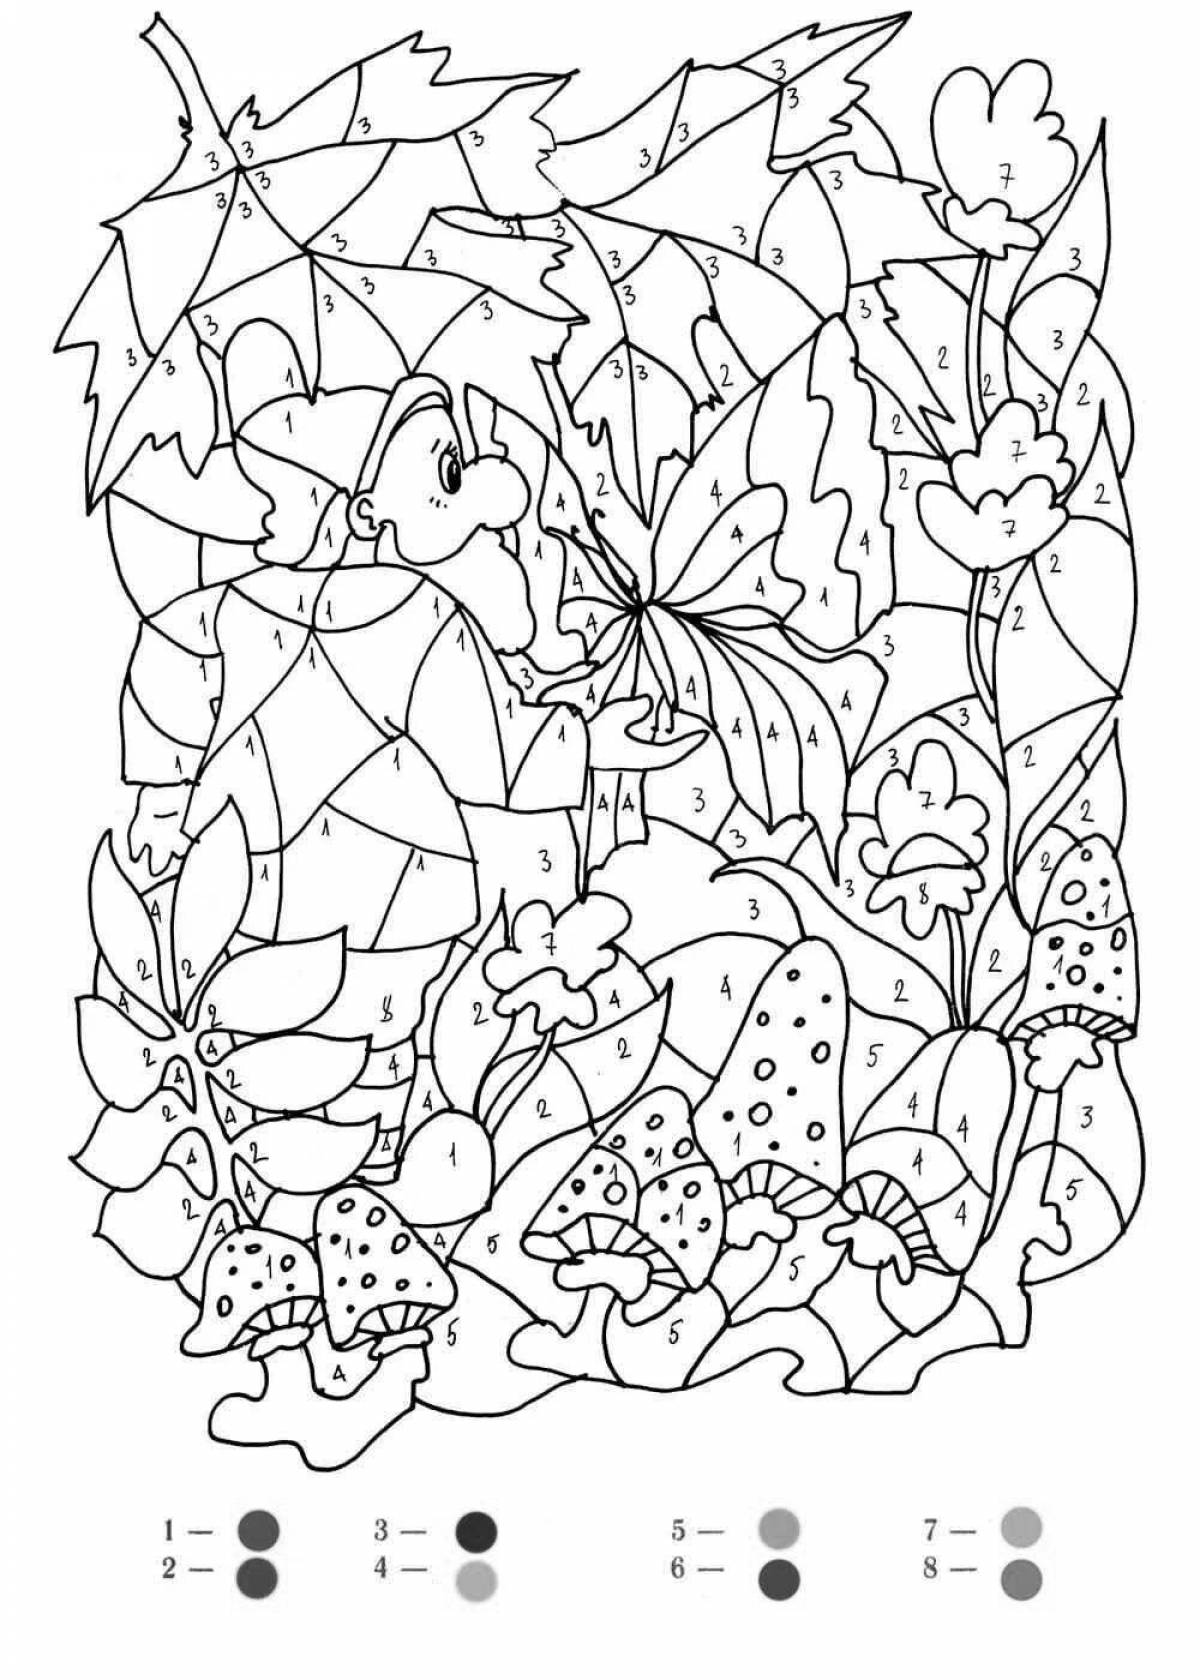 Joyful coloring for children 6-7 years old